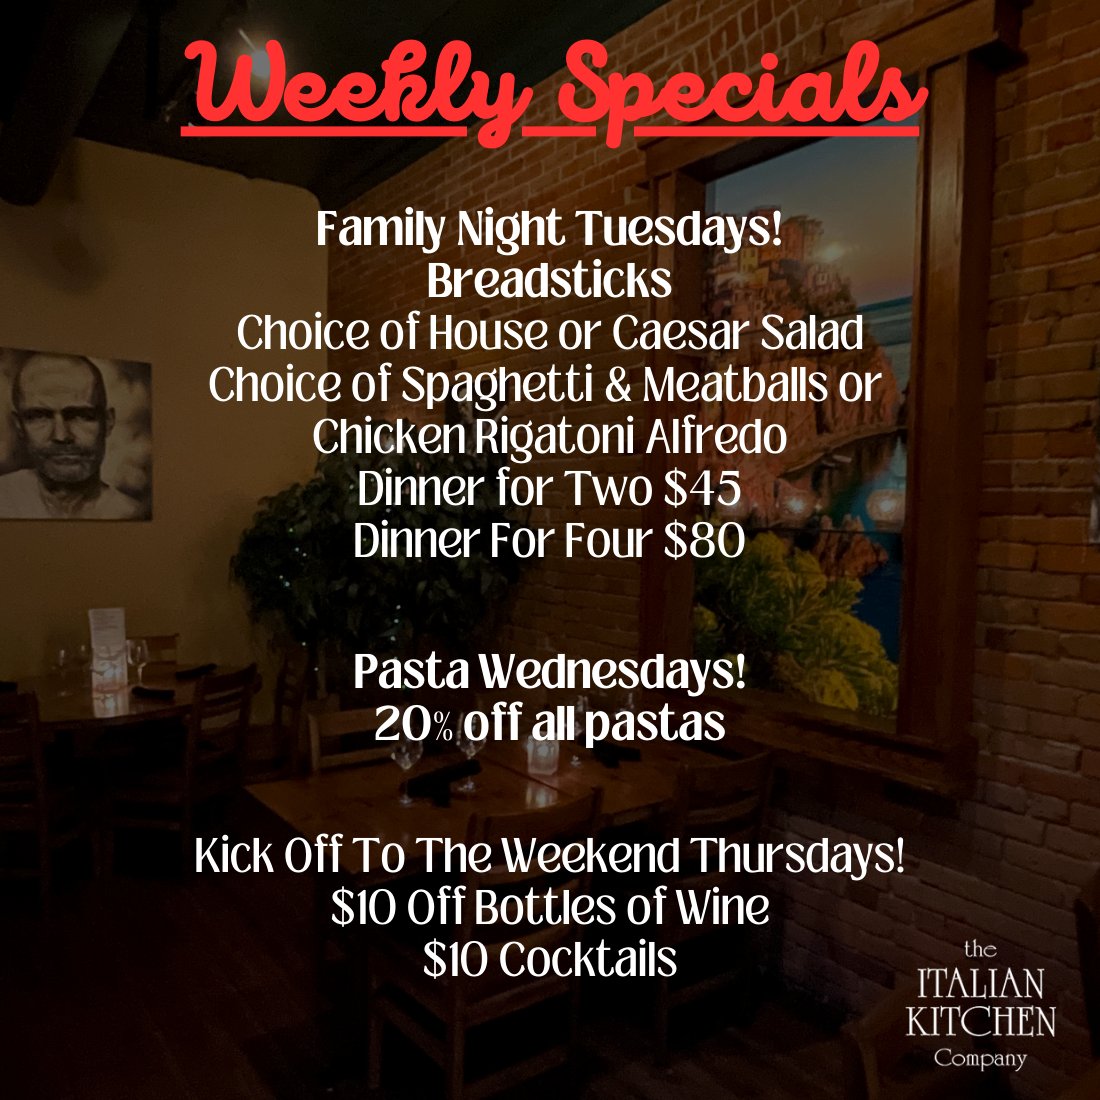 Come see us this week for one or all of our great specials!! 

#italiankitchenvernon #italiancooking #downtownvernon #vernonbc #vernoneats #goodeats #familynight #pastawednesday